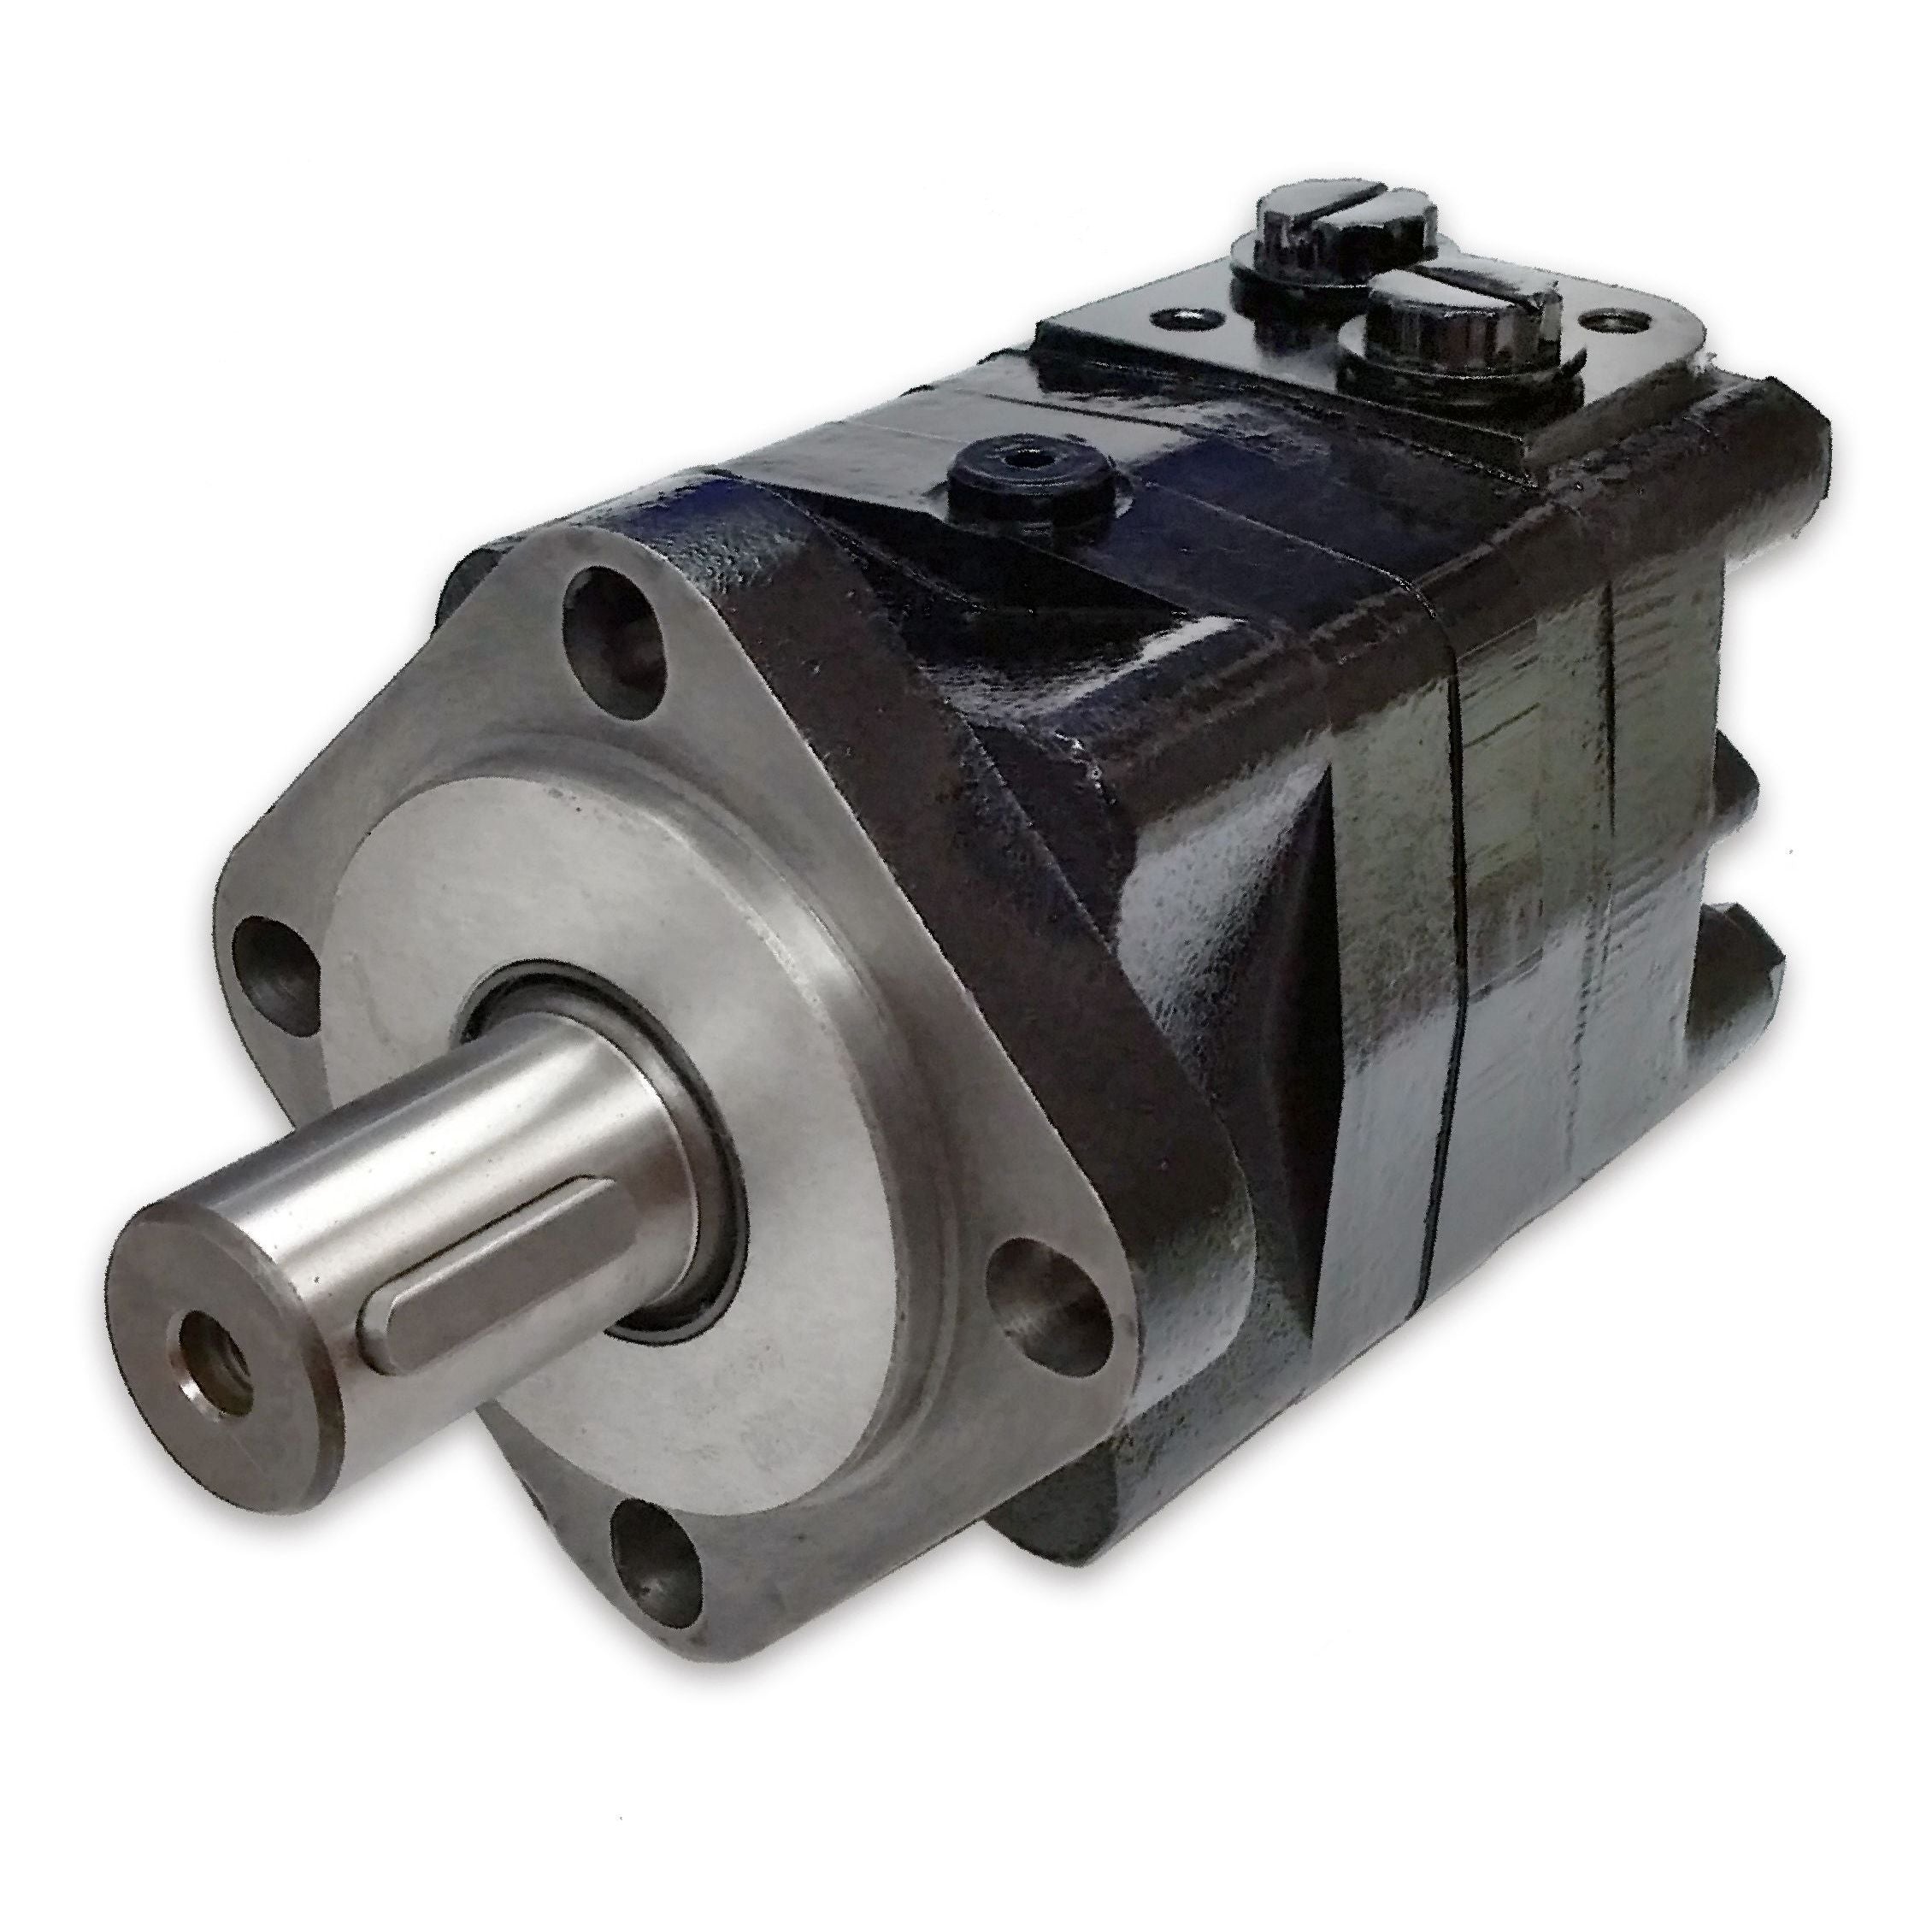 BMSY-250-E4-G-S : Dynamic LSHT Motor, 243cc, 300RPM, 6265in-lb, 2900psi Differential, 19.81GPM, SAE A 4-Bolt Mount, 1.25" Bore x 5/16" Key Shaft, Side Ported, #10 SAE (5/8")